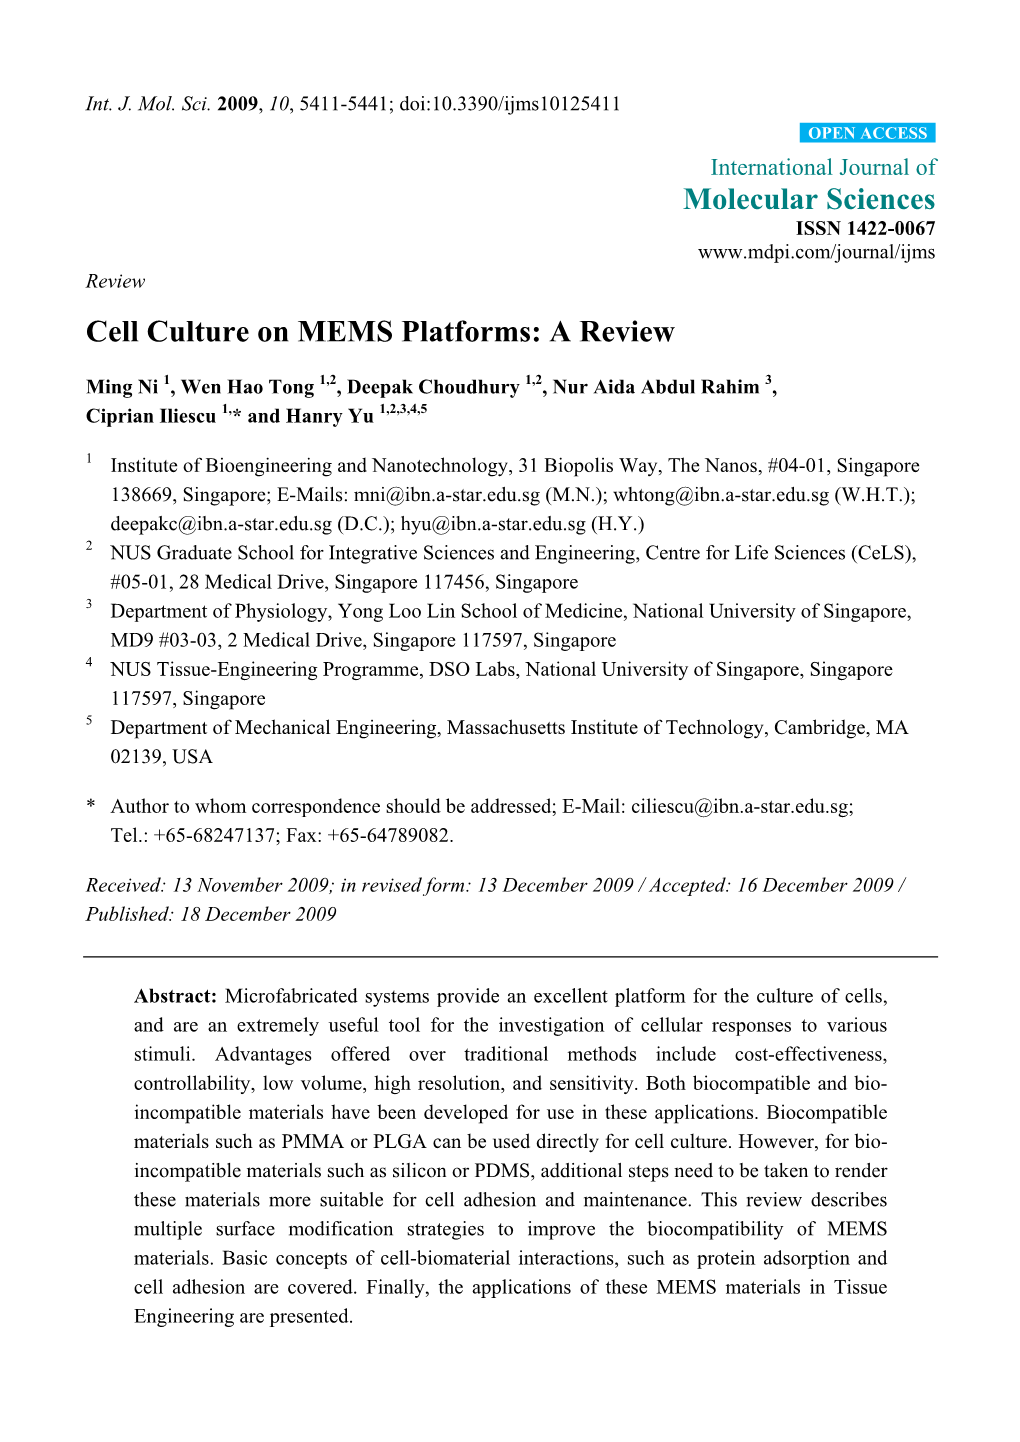 Cell Culture on MEMS Platforms: a Review